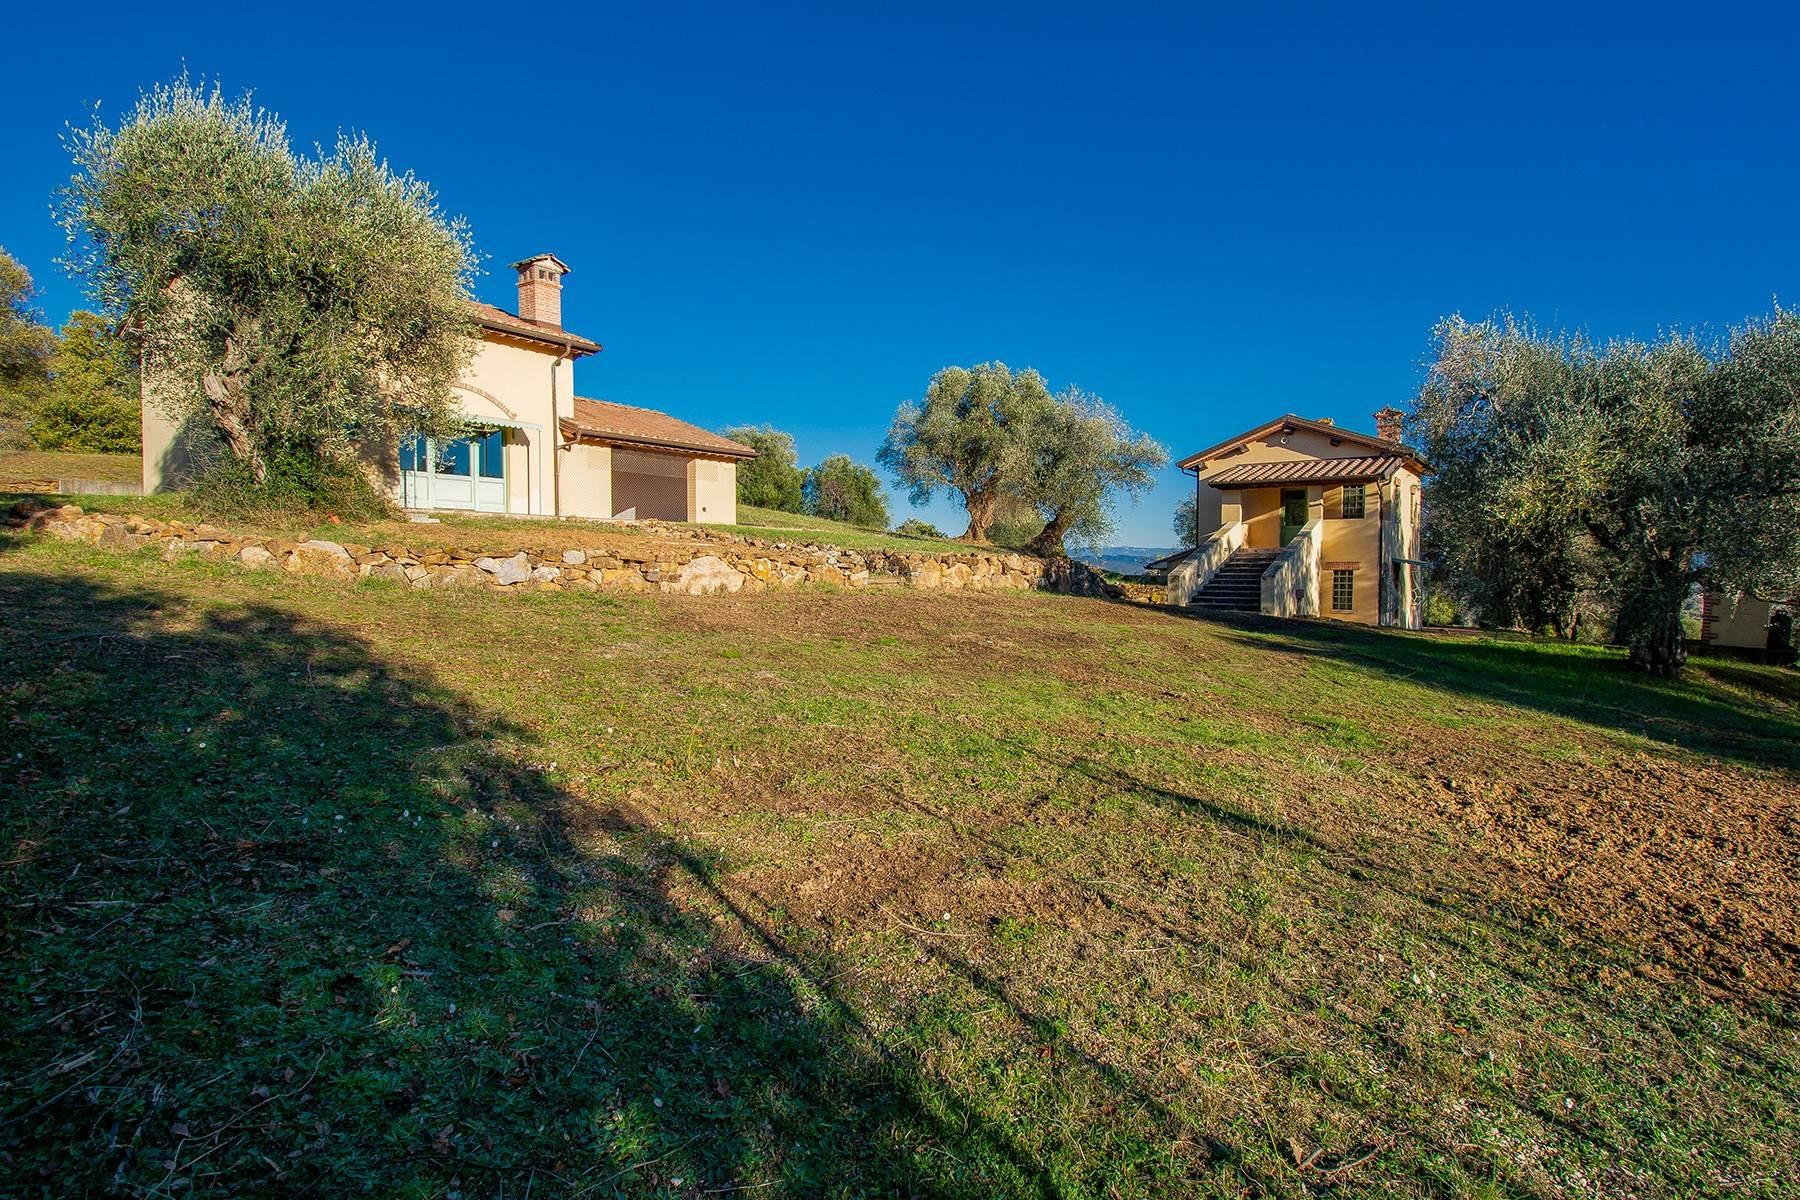 Newly-built farmhouse nestled in the olive groves - 1